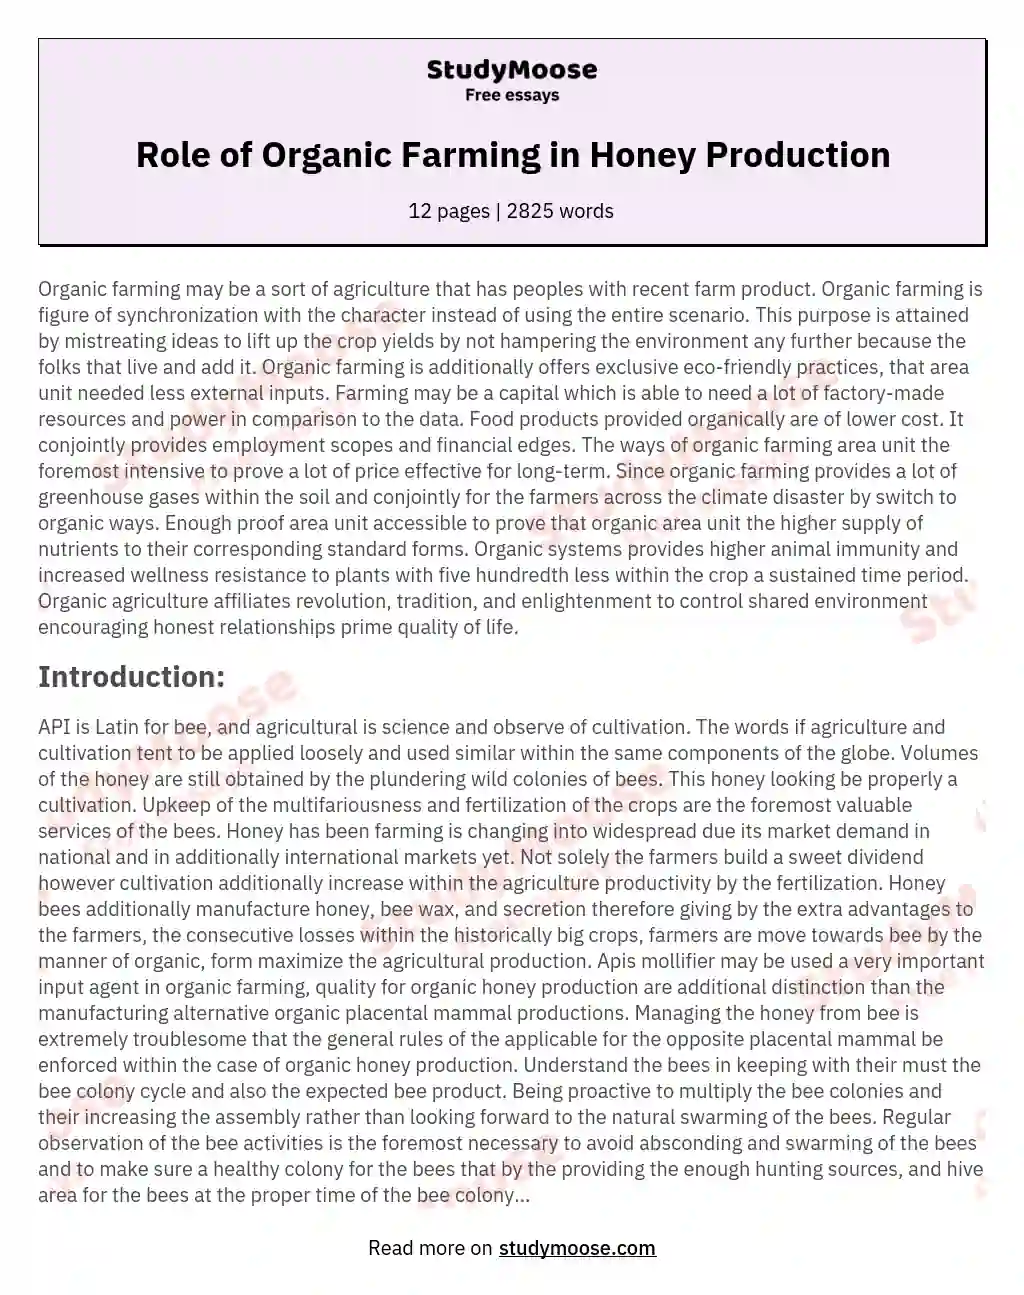 Role of Organic Farming in Honey Production essay